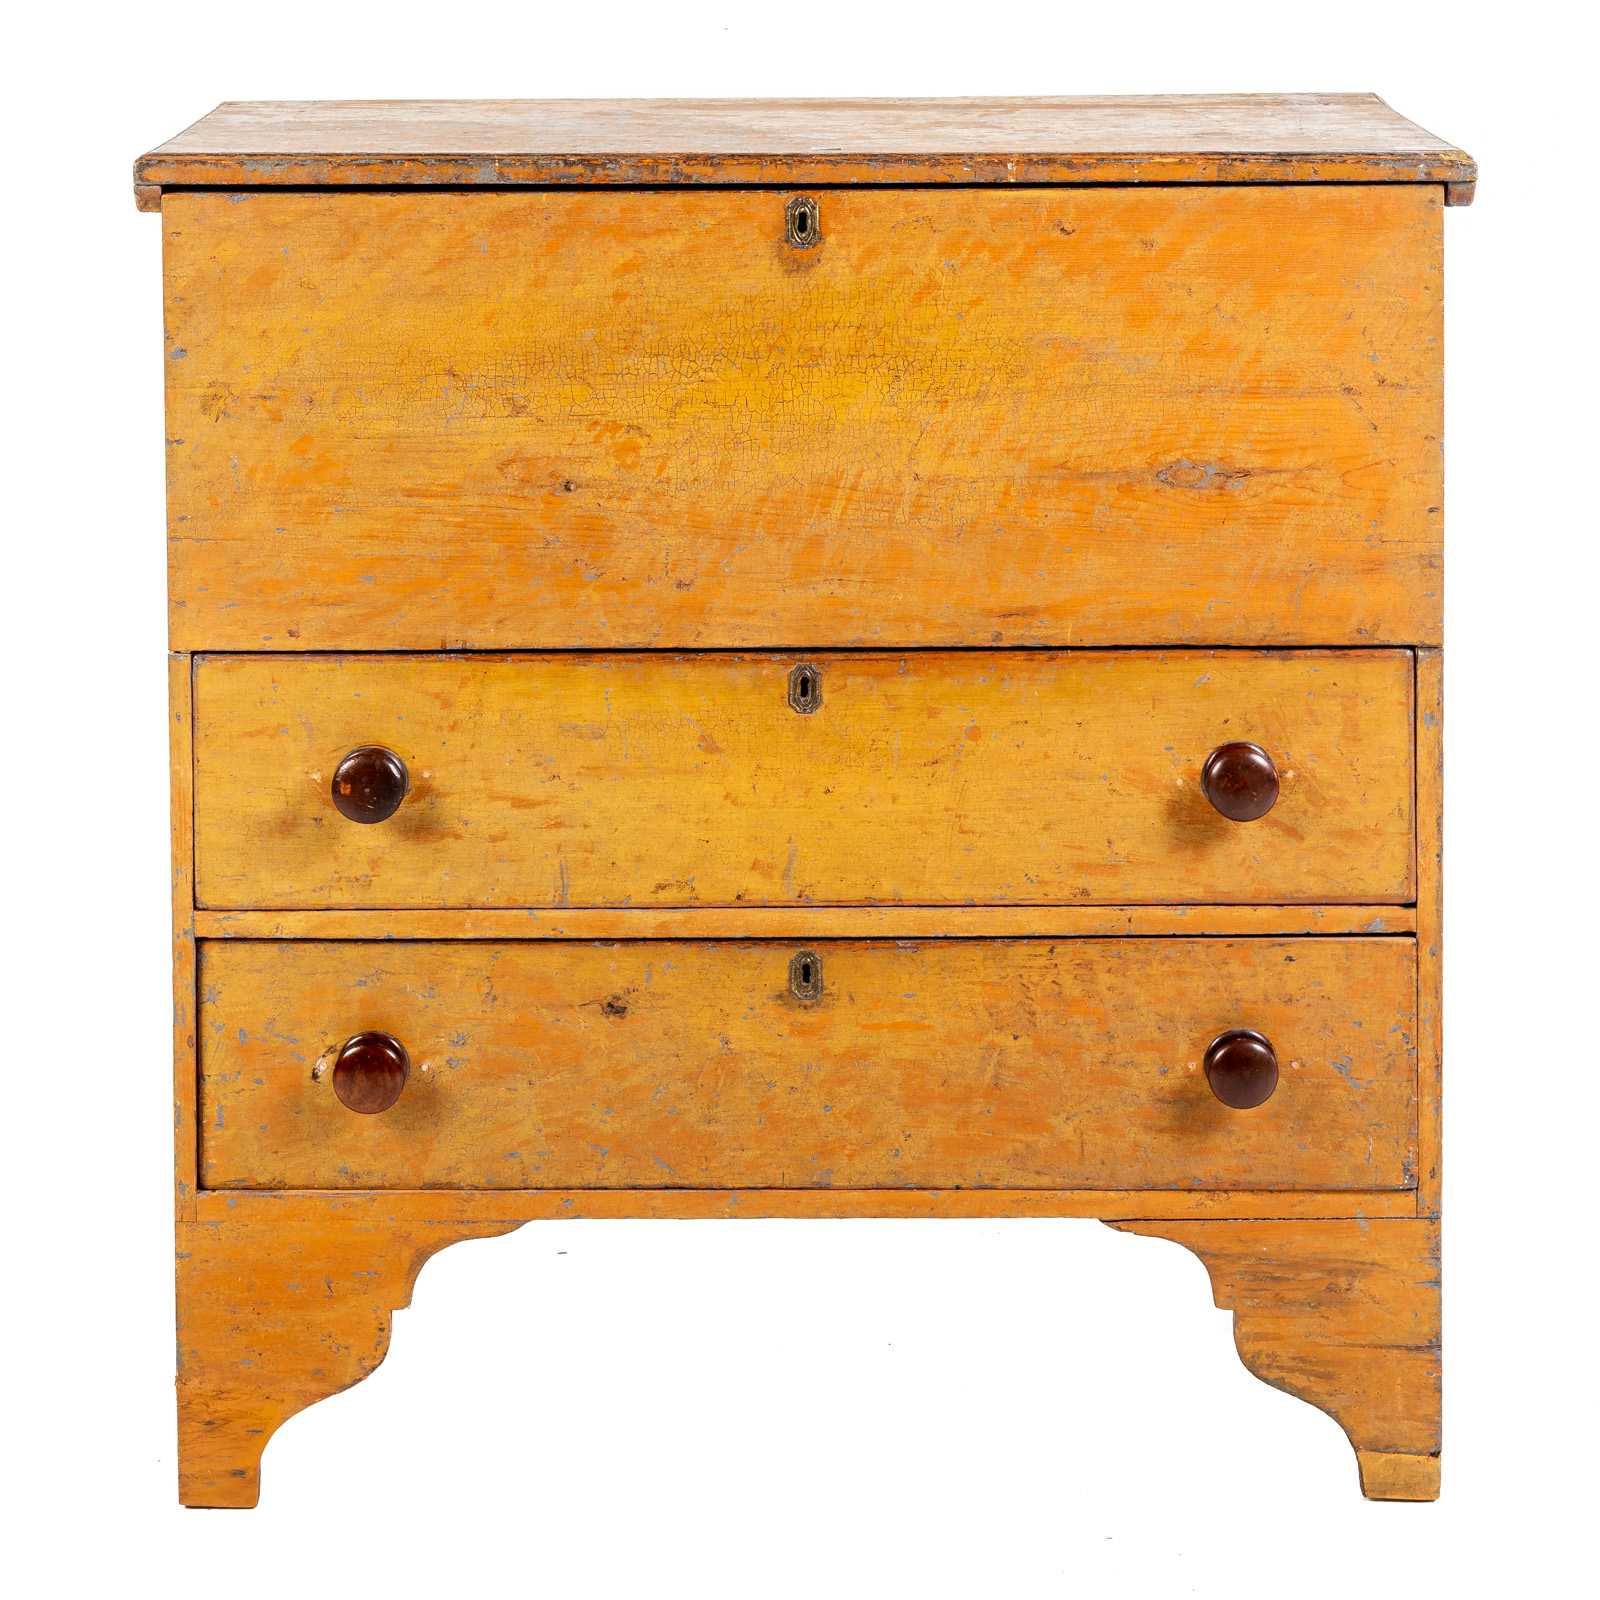 COUNTRY MUSTARD PAINTED MULE CHEST 29daff